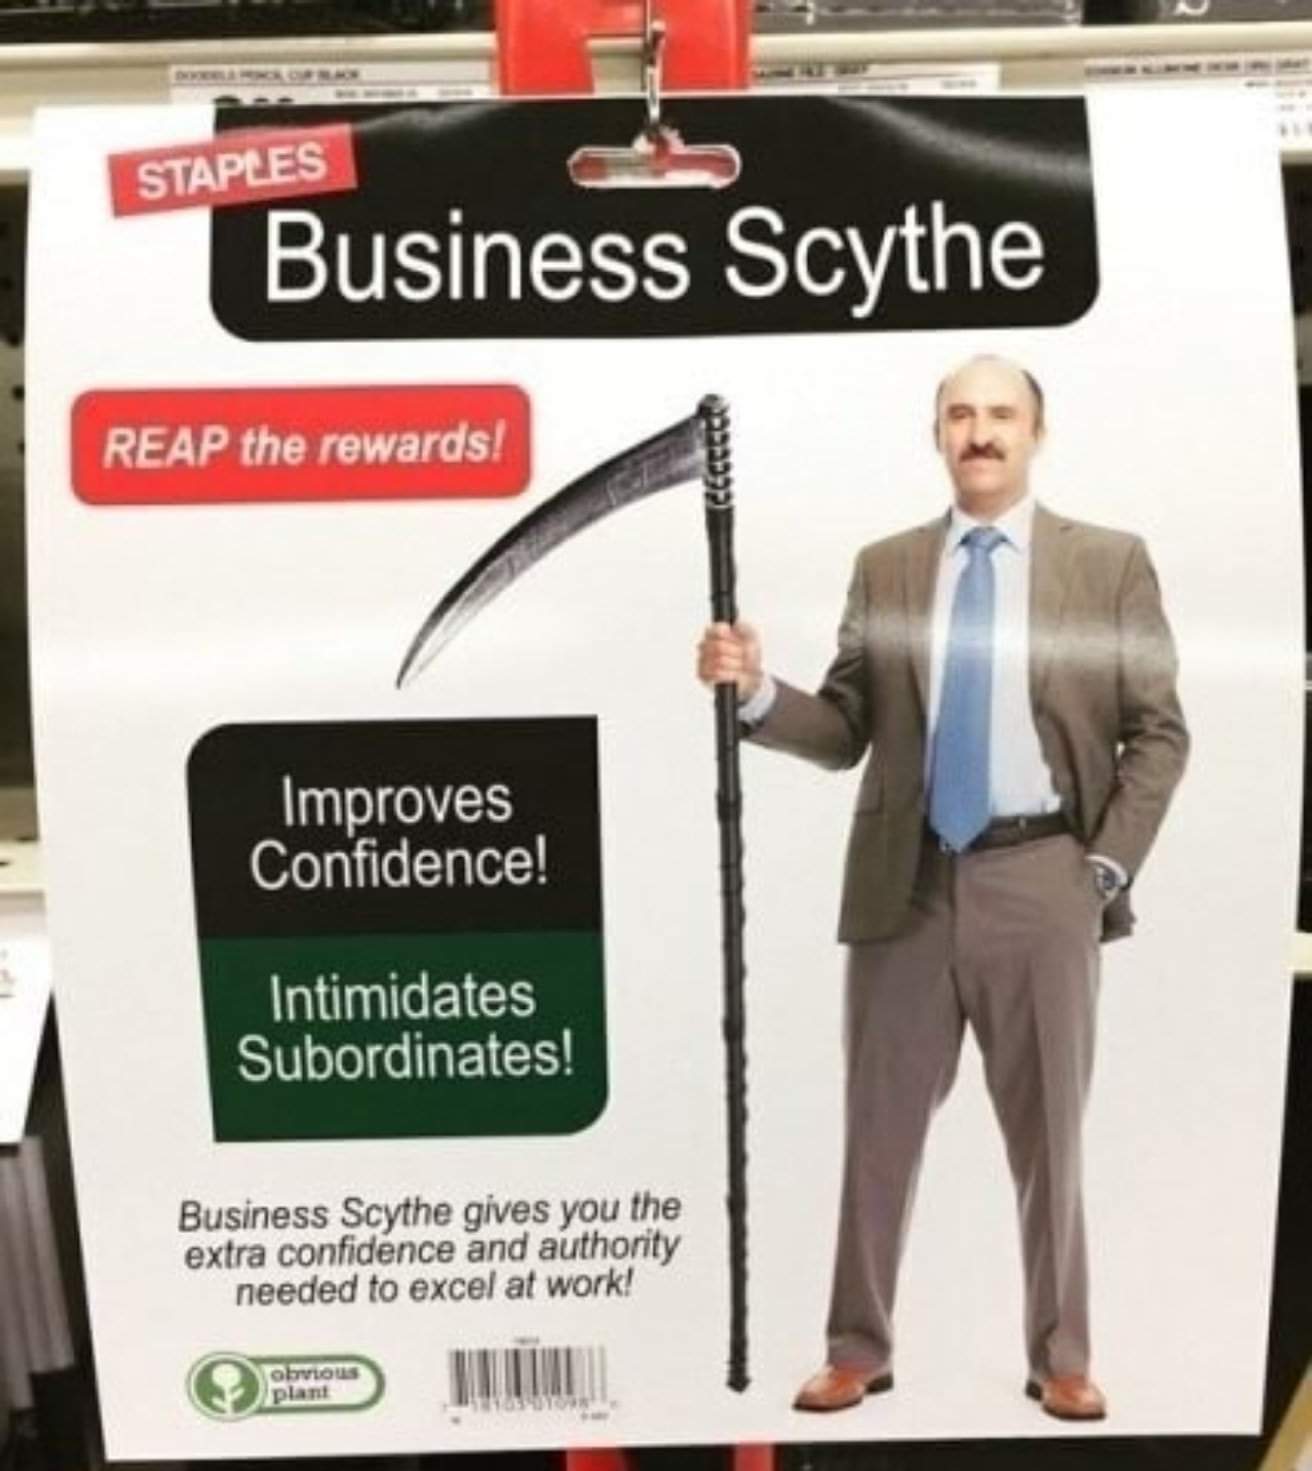 business scythe - Staples | Business Scythe Reap the rewards! Improves Confidence! Intimidates Subordinates! Business Scythe gives you the extra confidence and authority needed to excel at work! Obvious plant